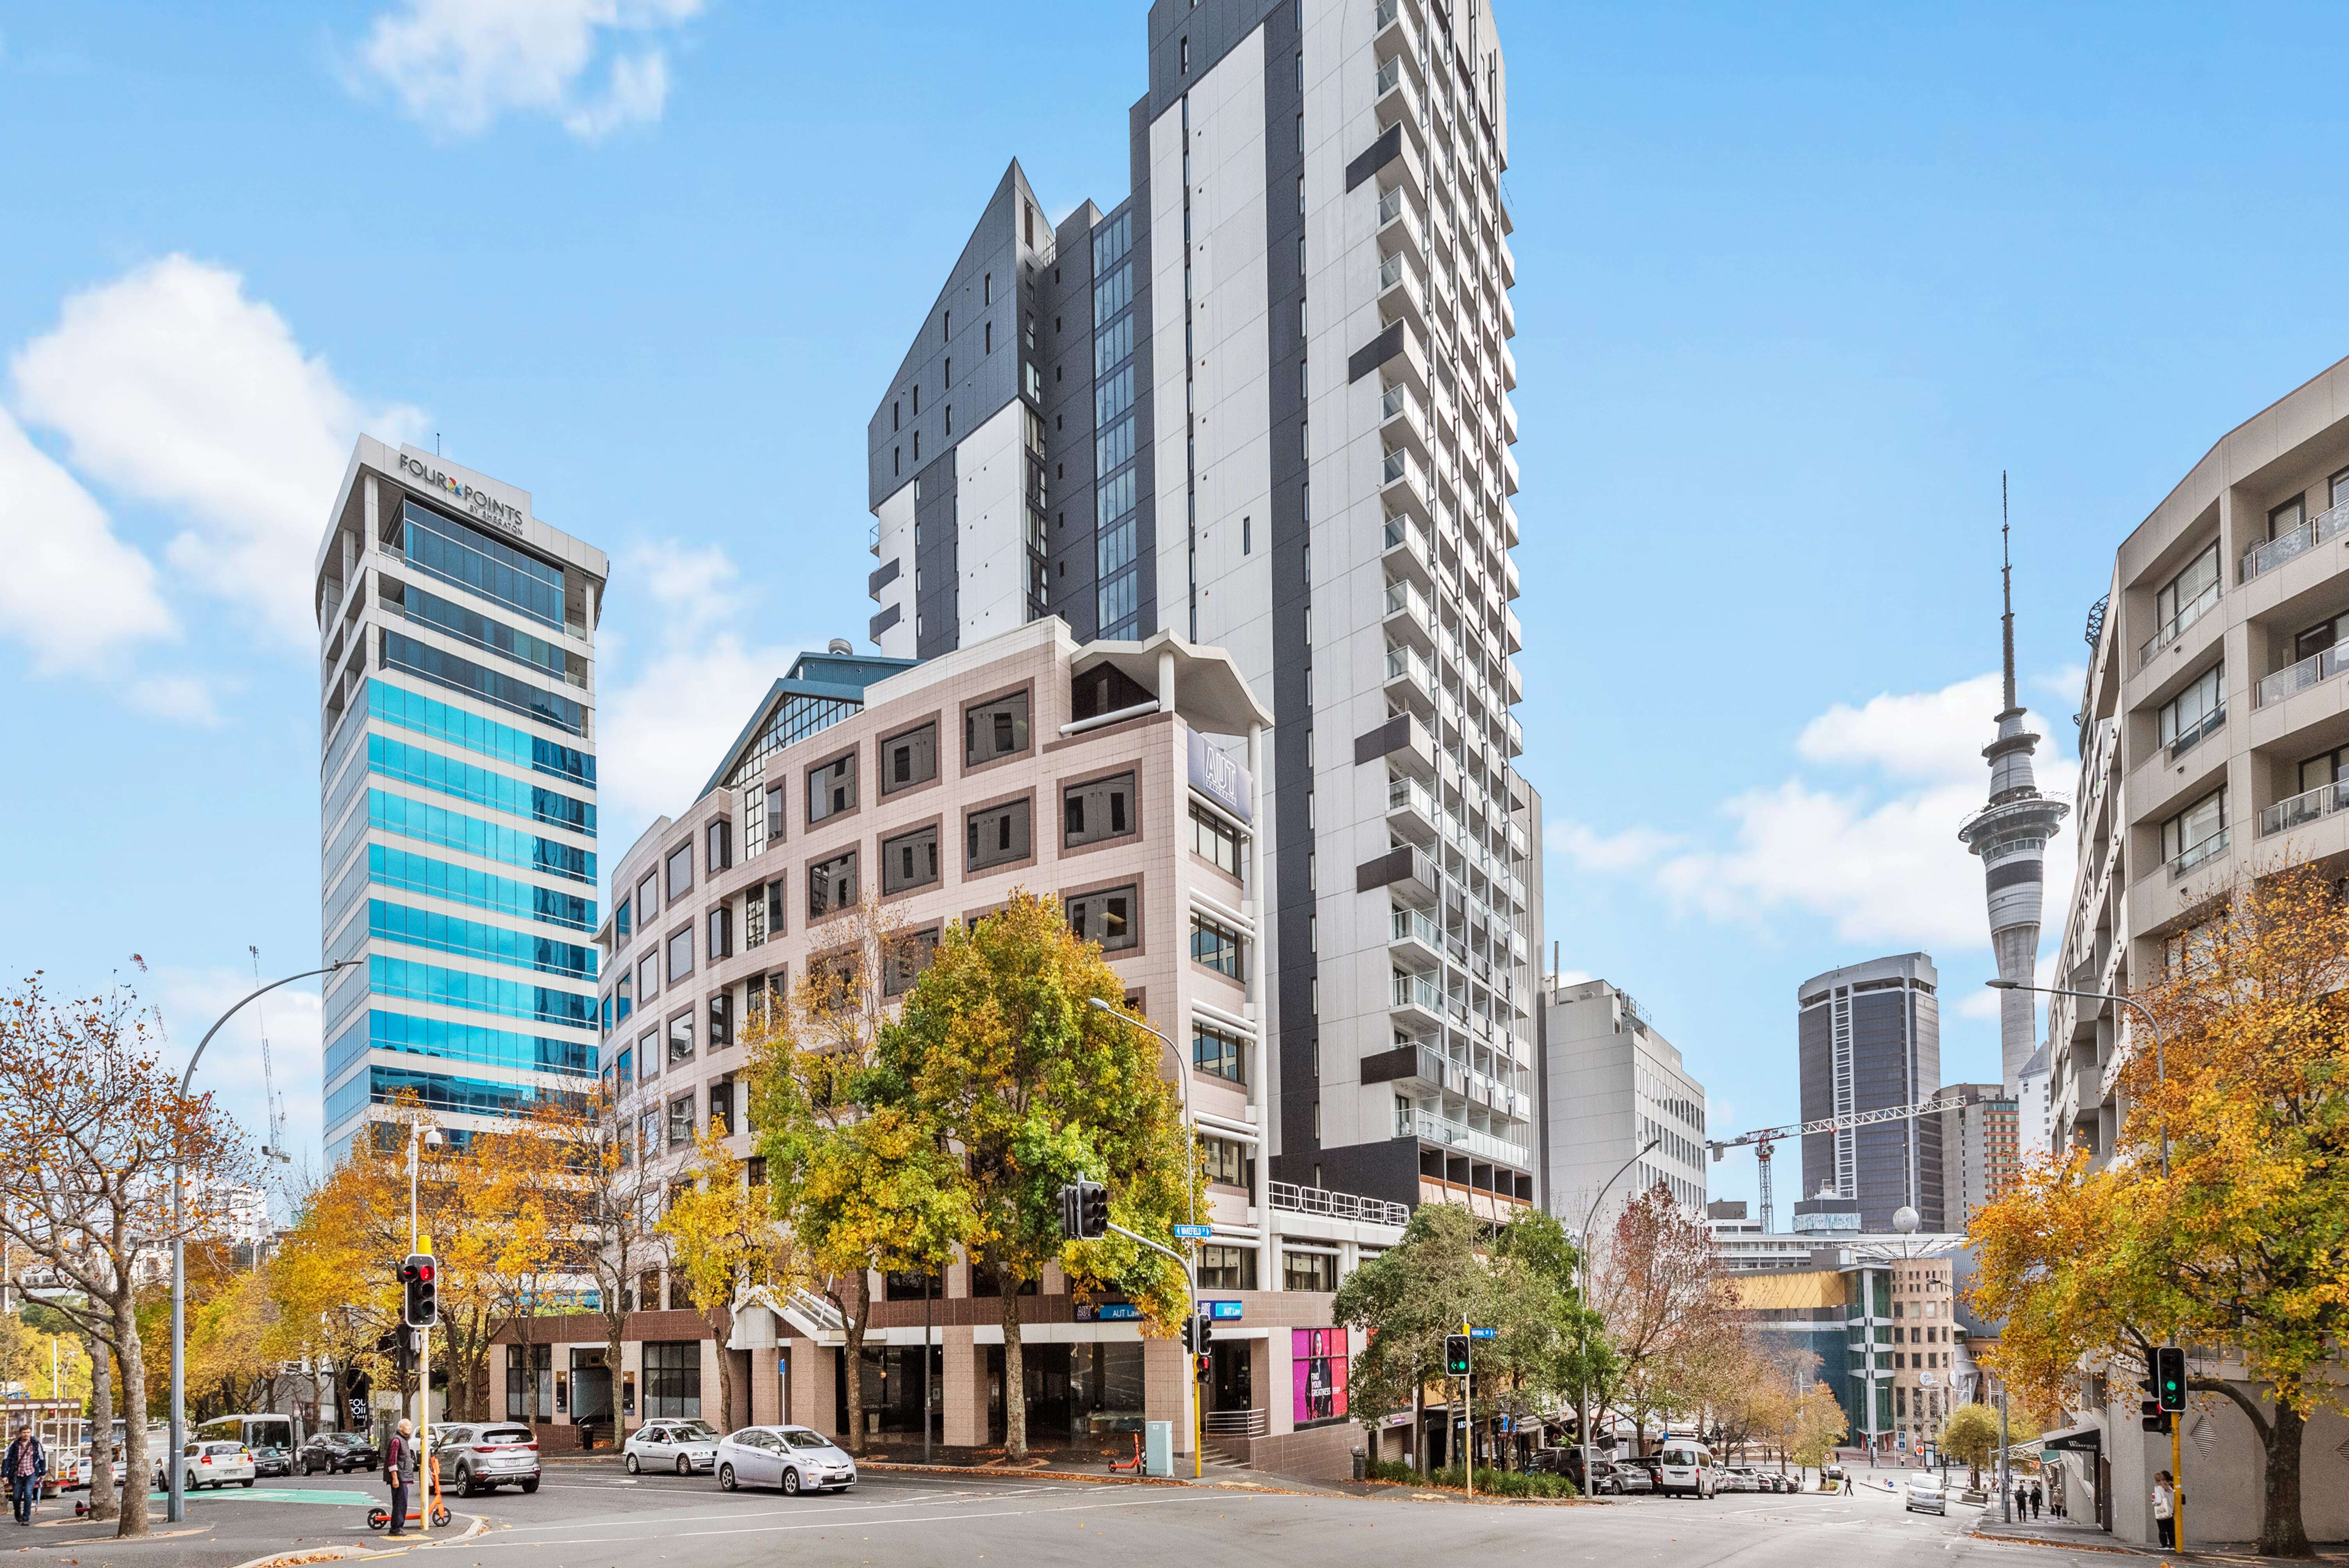 Rare Auckland University Office Building Hits the Market